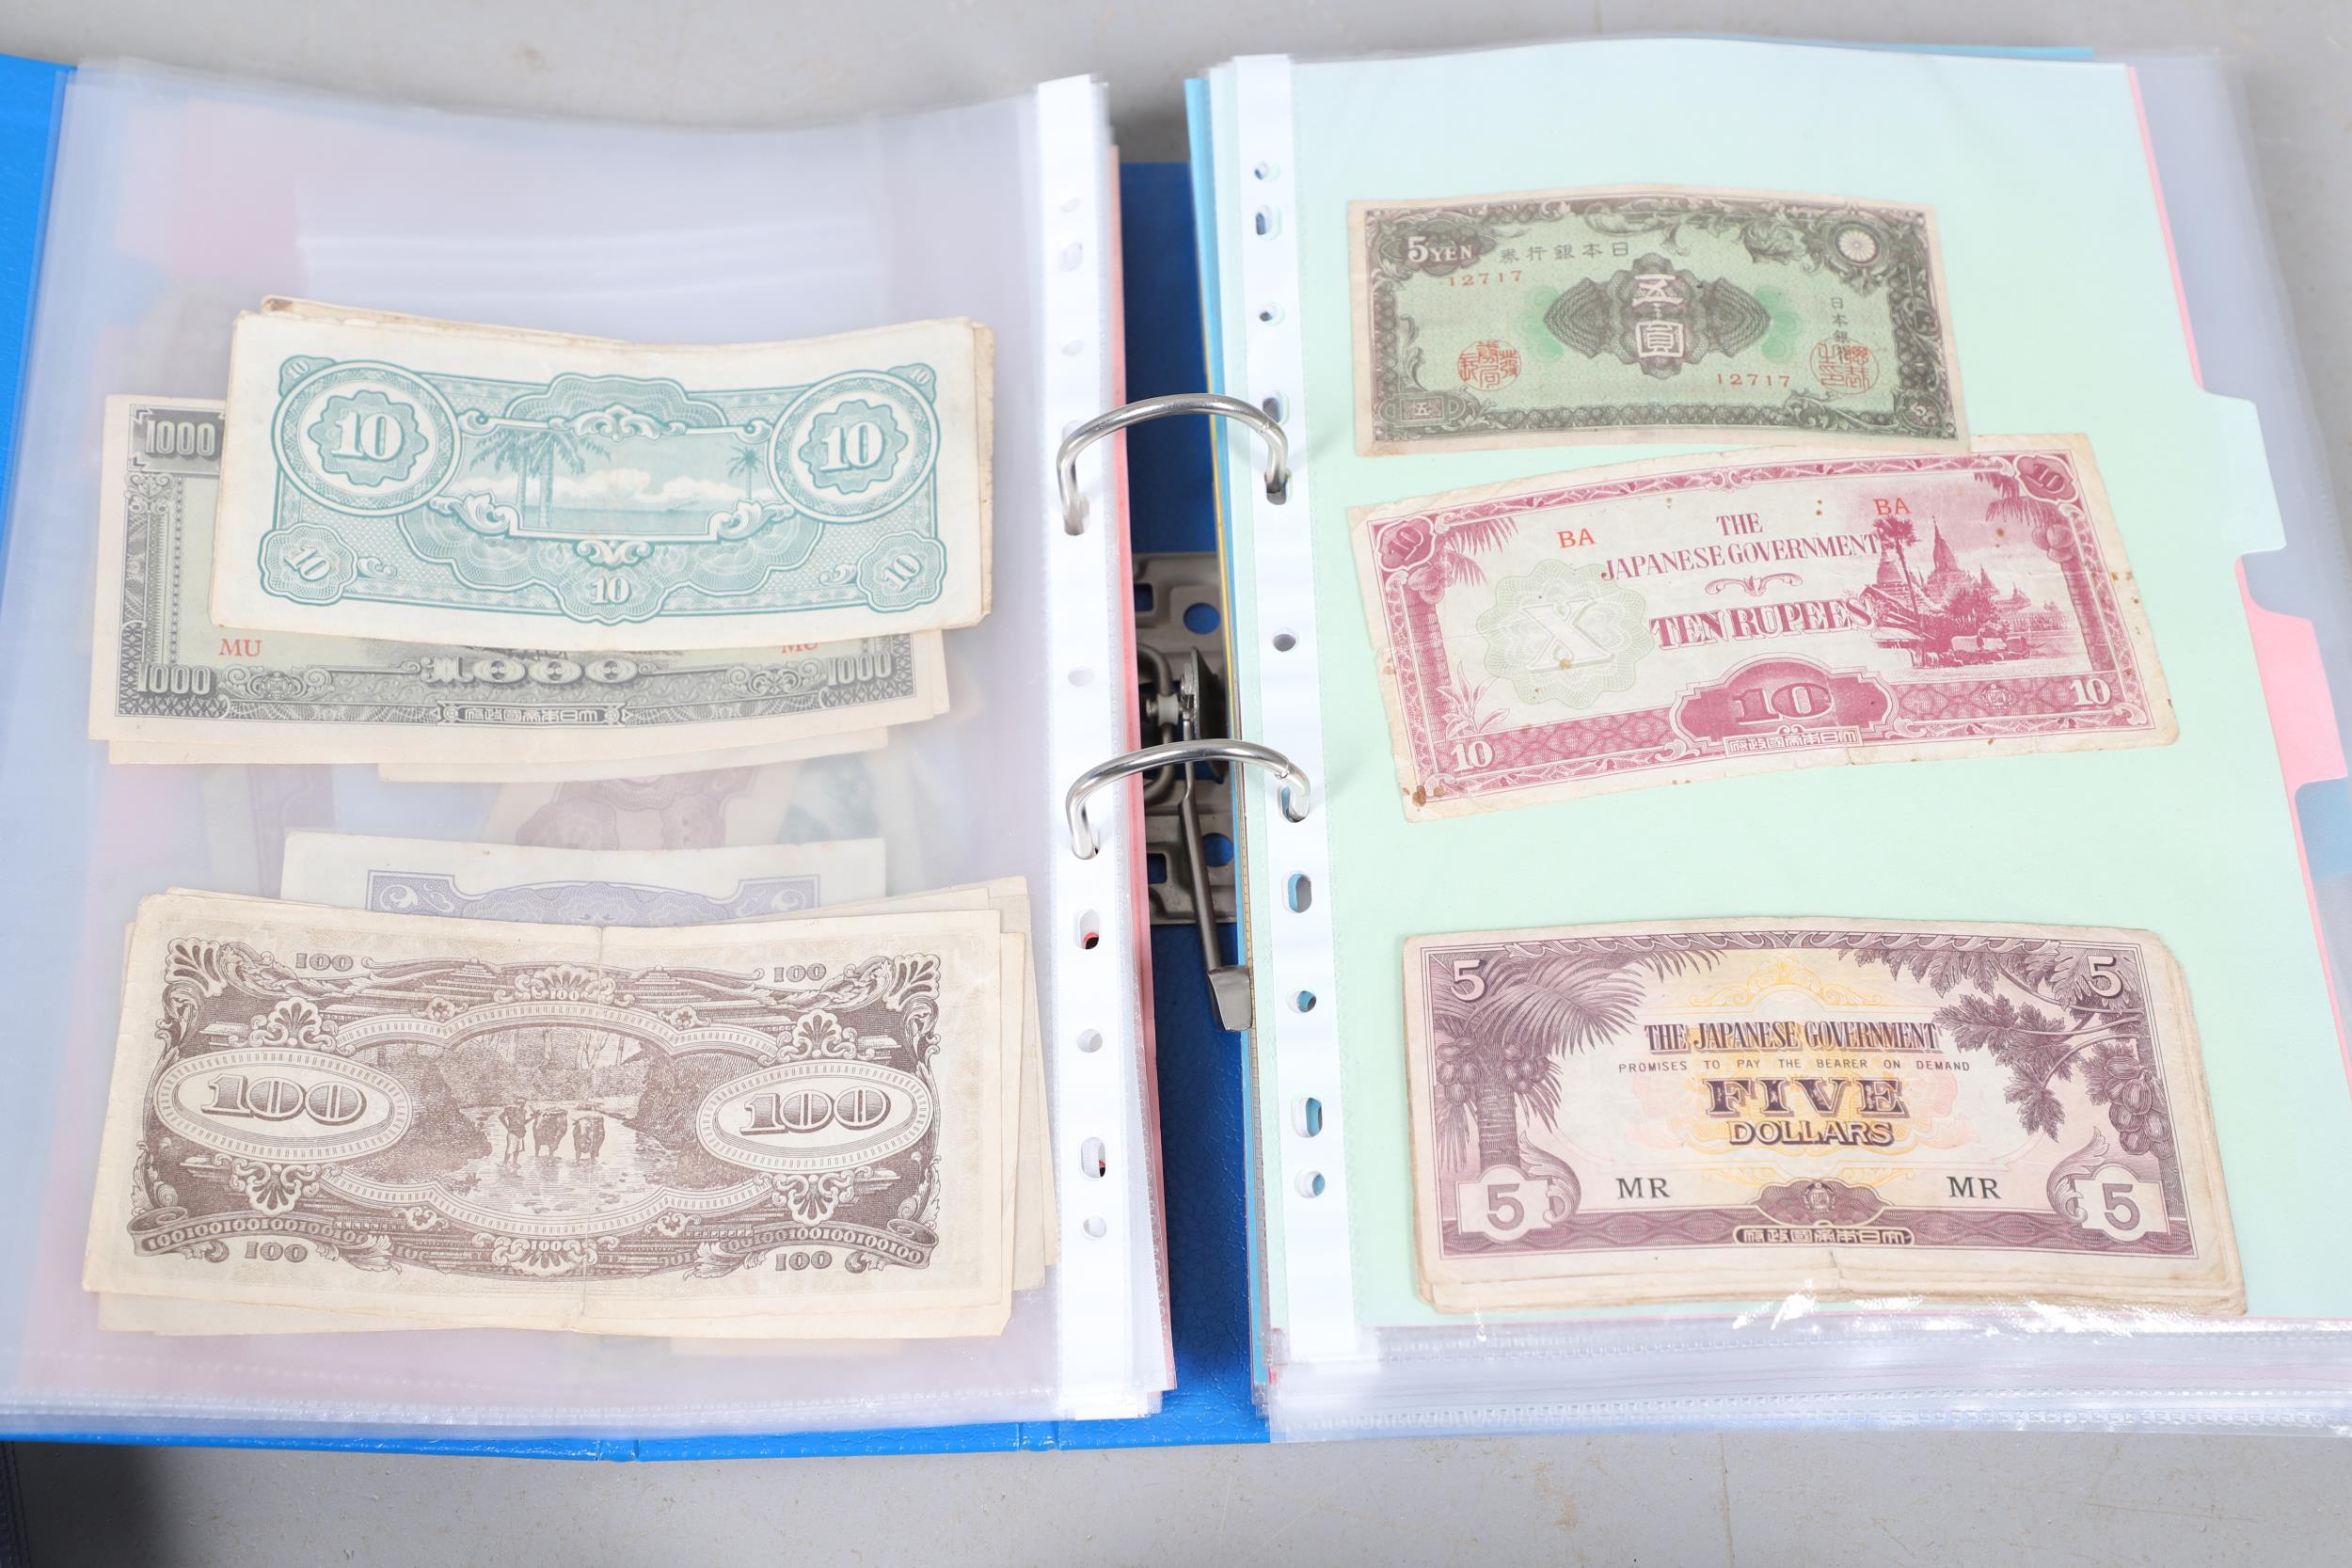 AN EXTENSIVE COLLECTION OF WORLD BANKNOTES. - Image 34 of 56